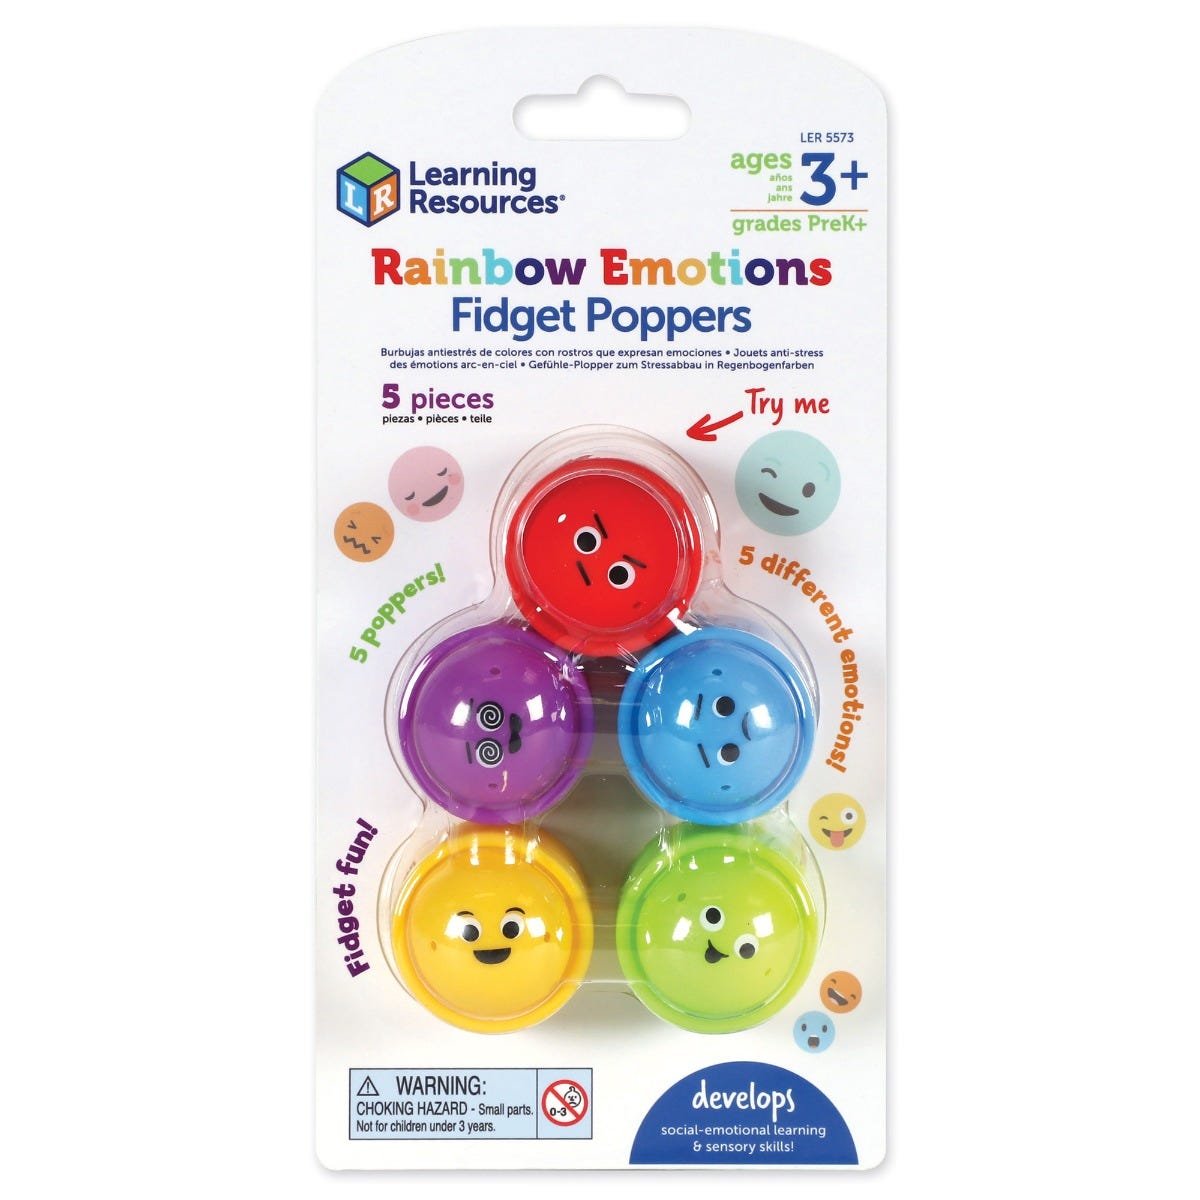 Rainbow Emotion Fidget Poppers, Introducing the Rainbow Emotion Fidget Poppers, the perfect tool to enhance social-emotional learning and sensory skills in children. The Rainbow Emotion Fidget Poppers are crafted from soft silicone and designed with little hands in mind, these captivating fidget poppers are a must-have for every child's fidget toy collection.Featuring a vibrant array of colors, each fidget popper boasts a delightful surprise – one of five expressive emoji-style faces that assist children in